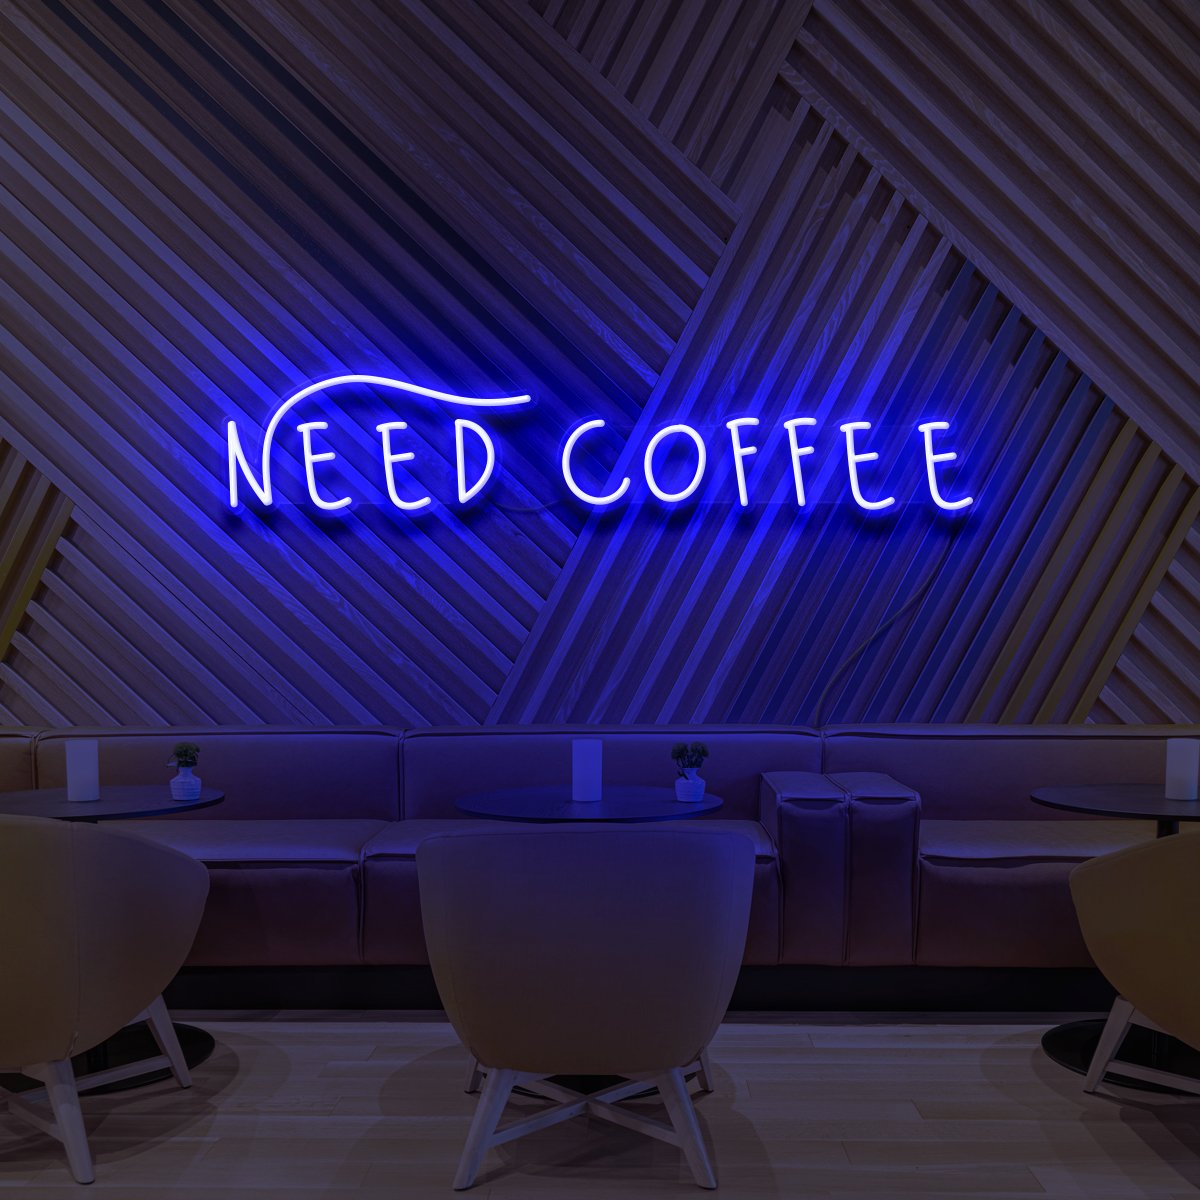 "Need Coffee" Neon Sign for Cafés 60cm (2ft) / Blue / LED Neon by Neon Icons